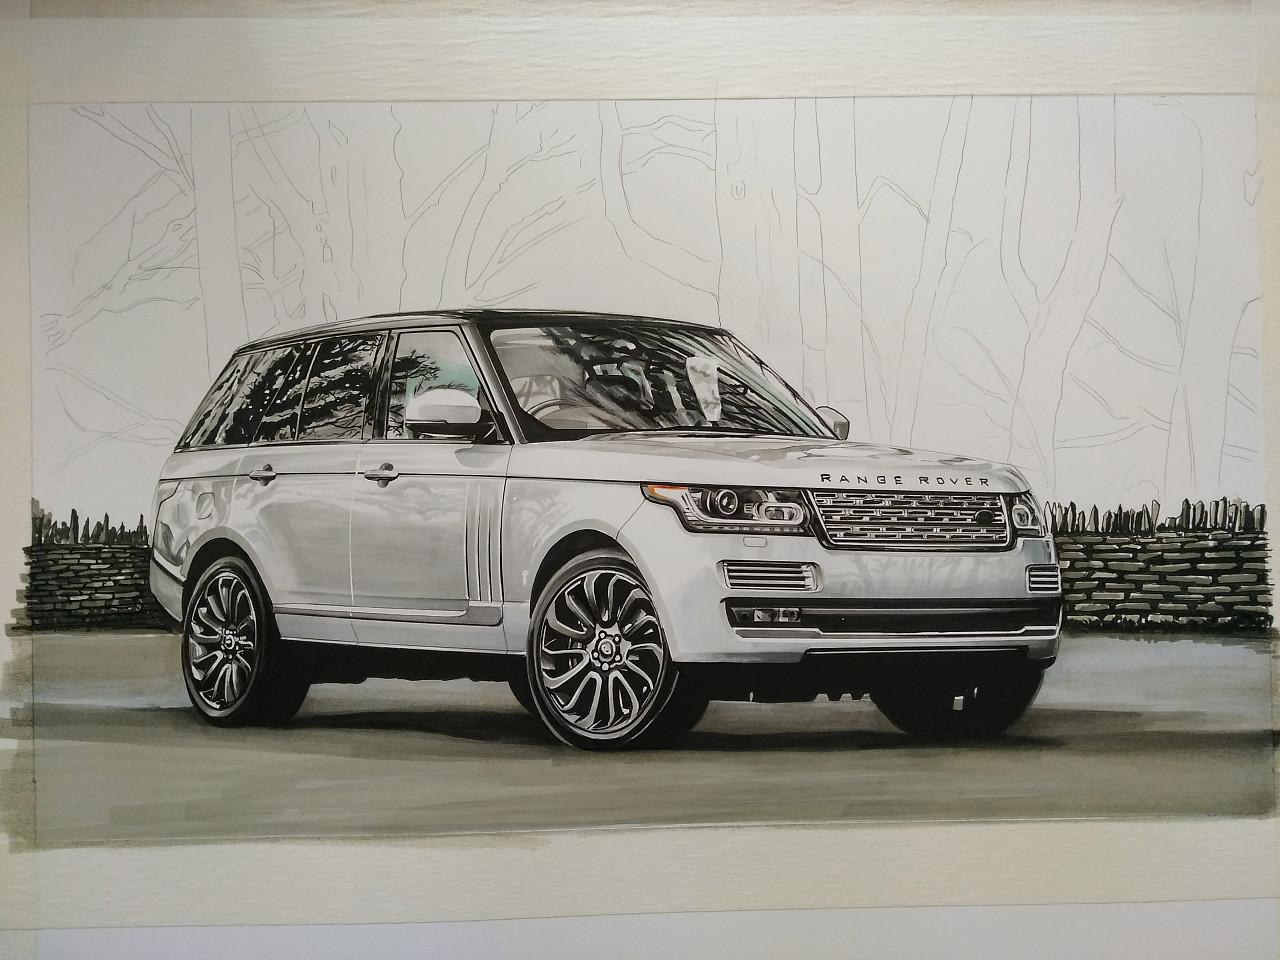 Easy Drawing Car Range Rover with ArtBeek Markers Step by Step